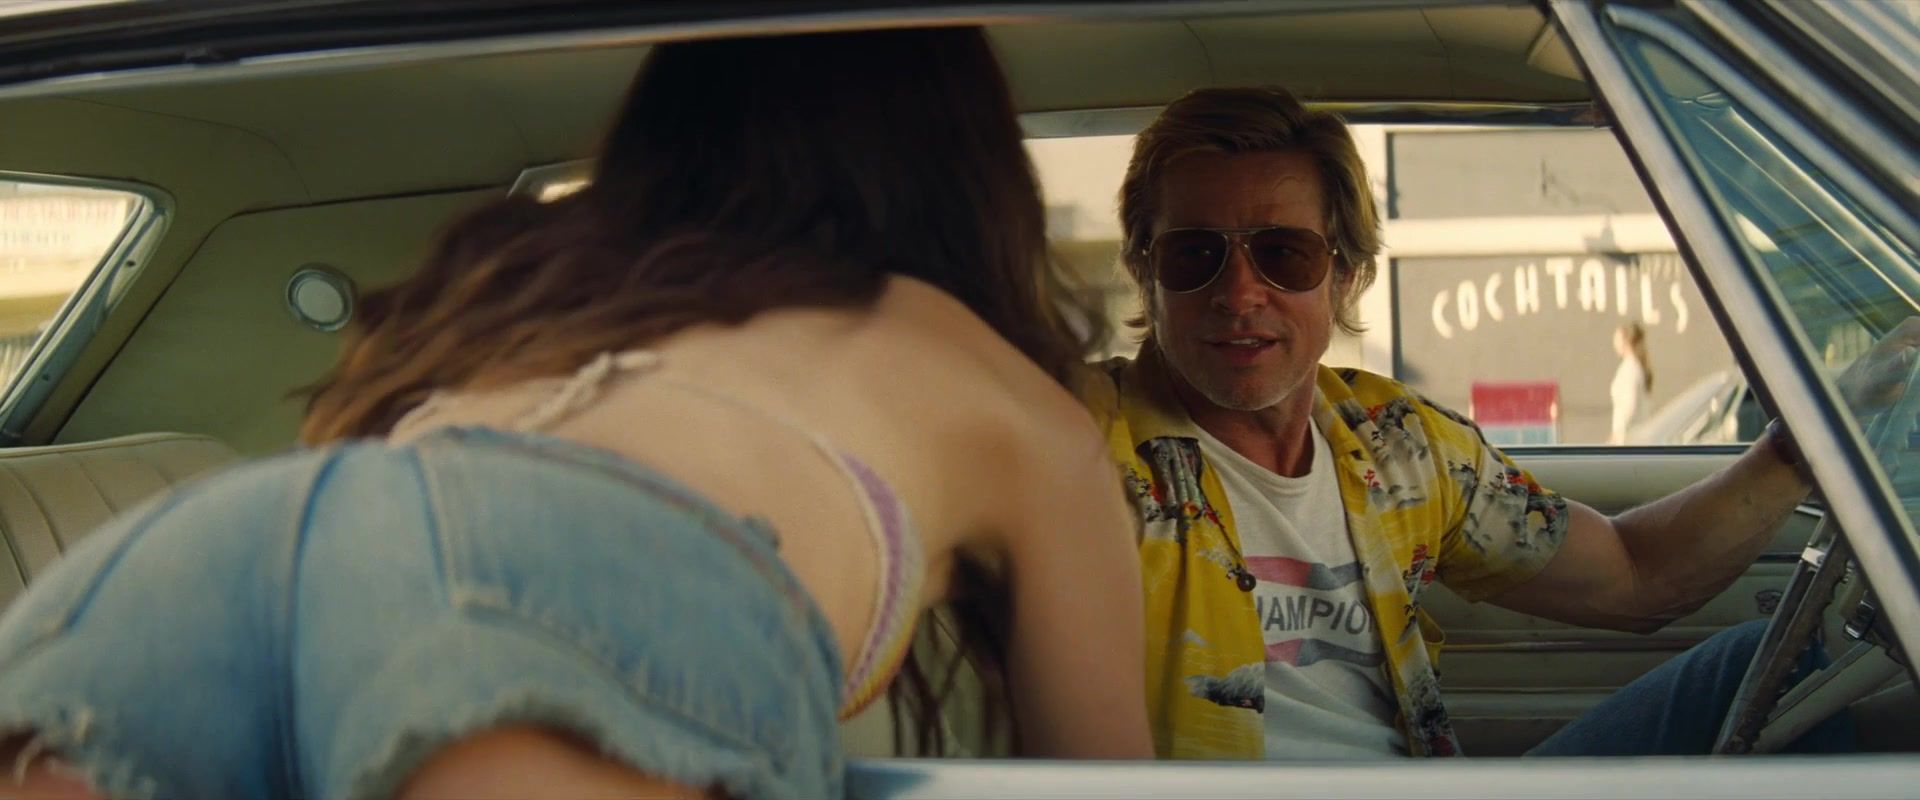 Porno Sexy Dakota Fanning, Margaret Qualley naked- Once Upon A Time In Hollywood (2019) Daddy